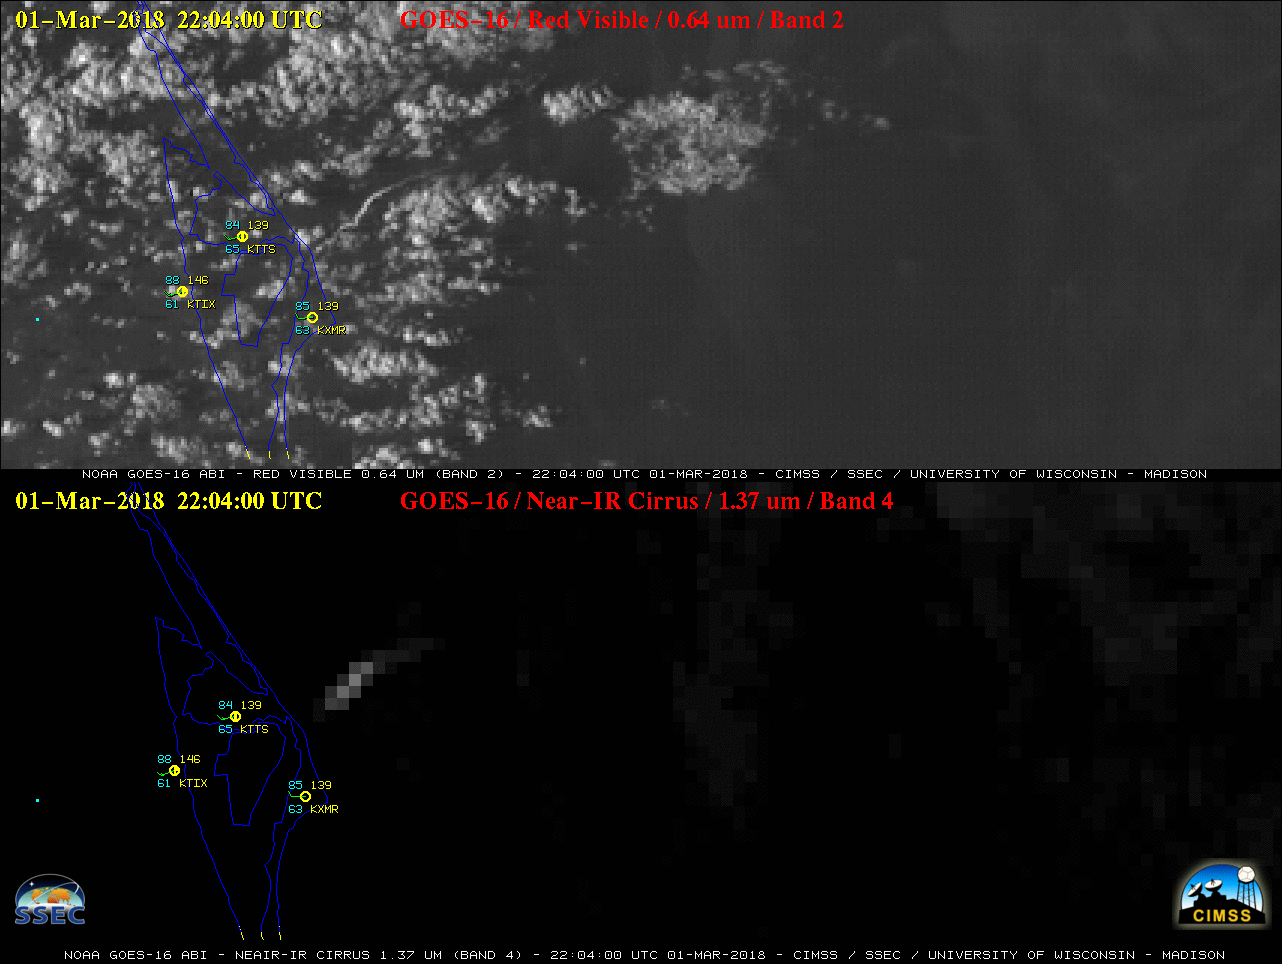 GOES-16 “Red” Visible (0.64 µm, top), “Blue” Visible (0.47 µm, middle) and Near-Infrared “Snow/Ice” (1.61 µm, bottom) images, with plots of surface reports [click to play animation]